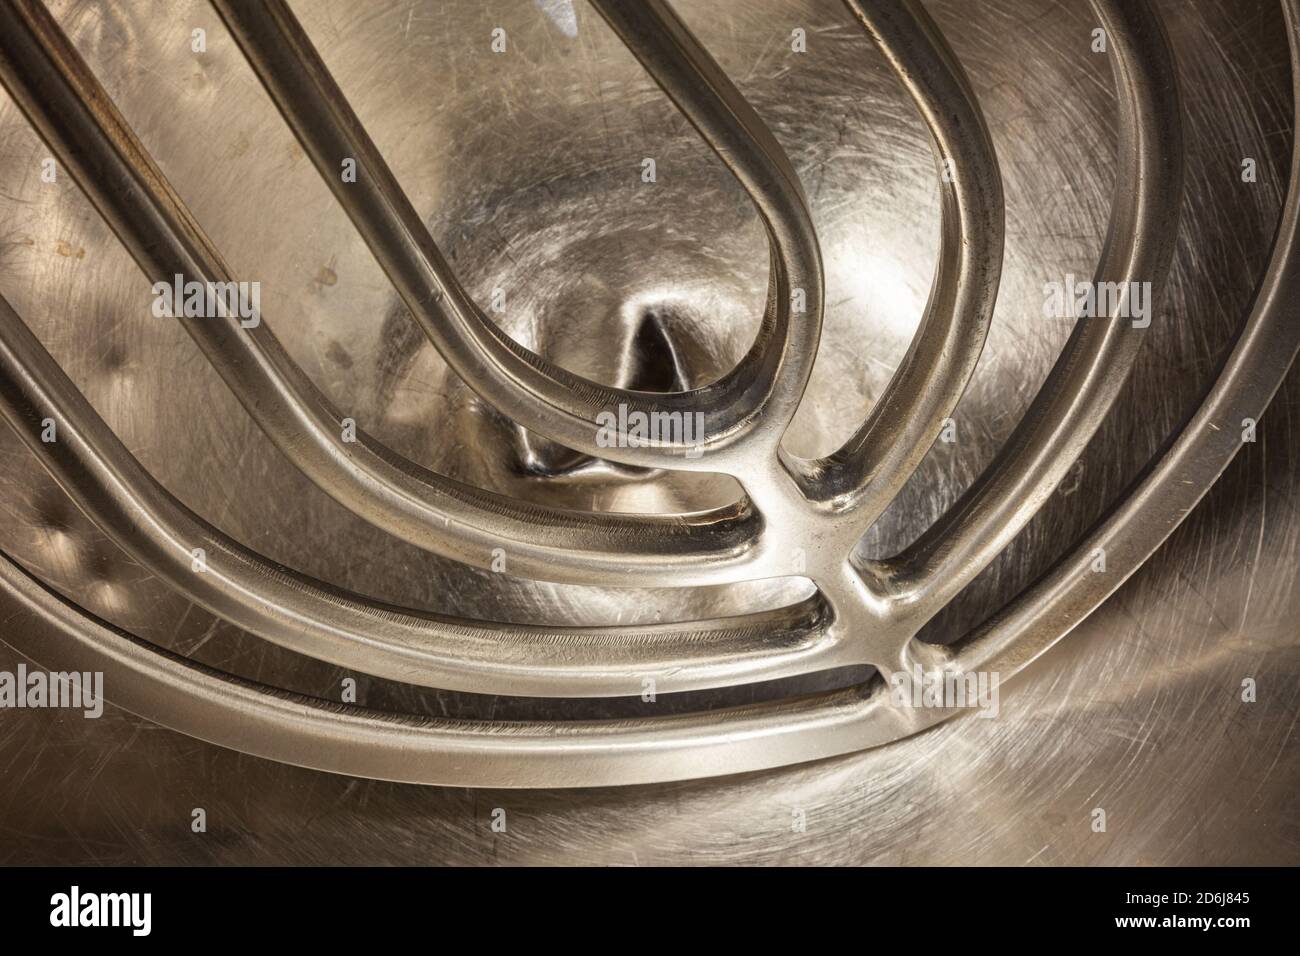 https://c8.alamy.com/comp/2D6J845/abstract-image-of-a-large-aluminum-mixer-paddle-in-a-140-quart-stainless-steel-mixing-bowl-2D6J845.jpg